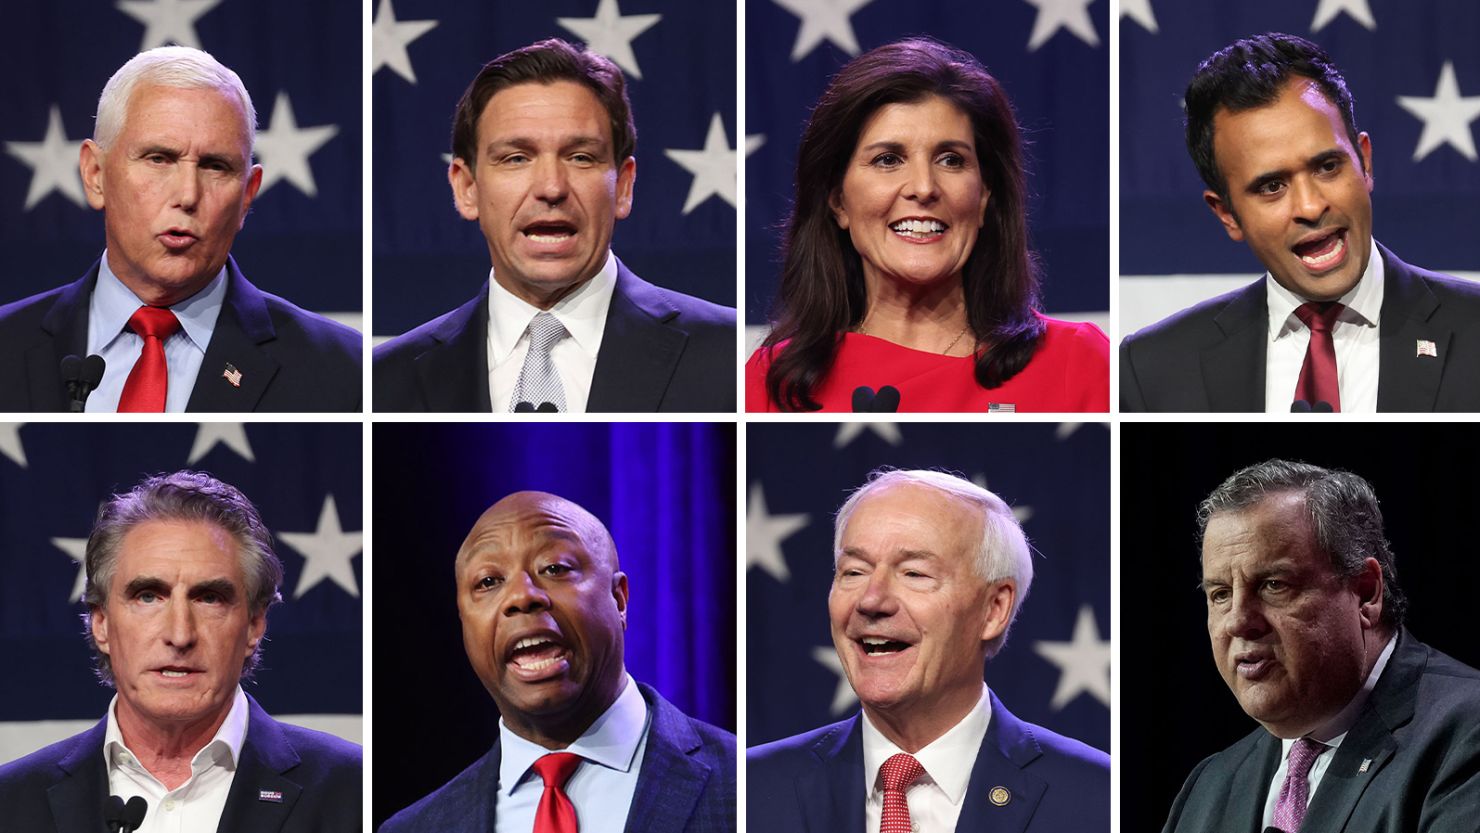 8 candidates qualify for first 2024 Republican presidential debate